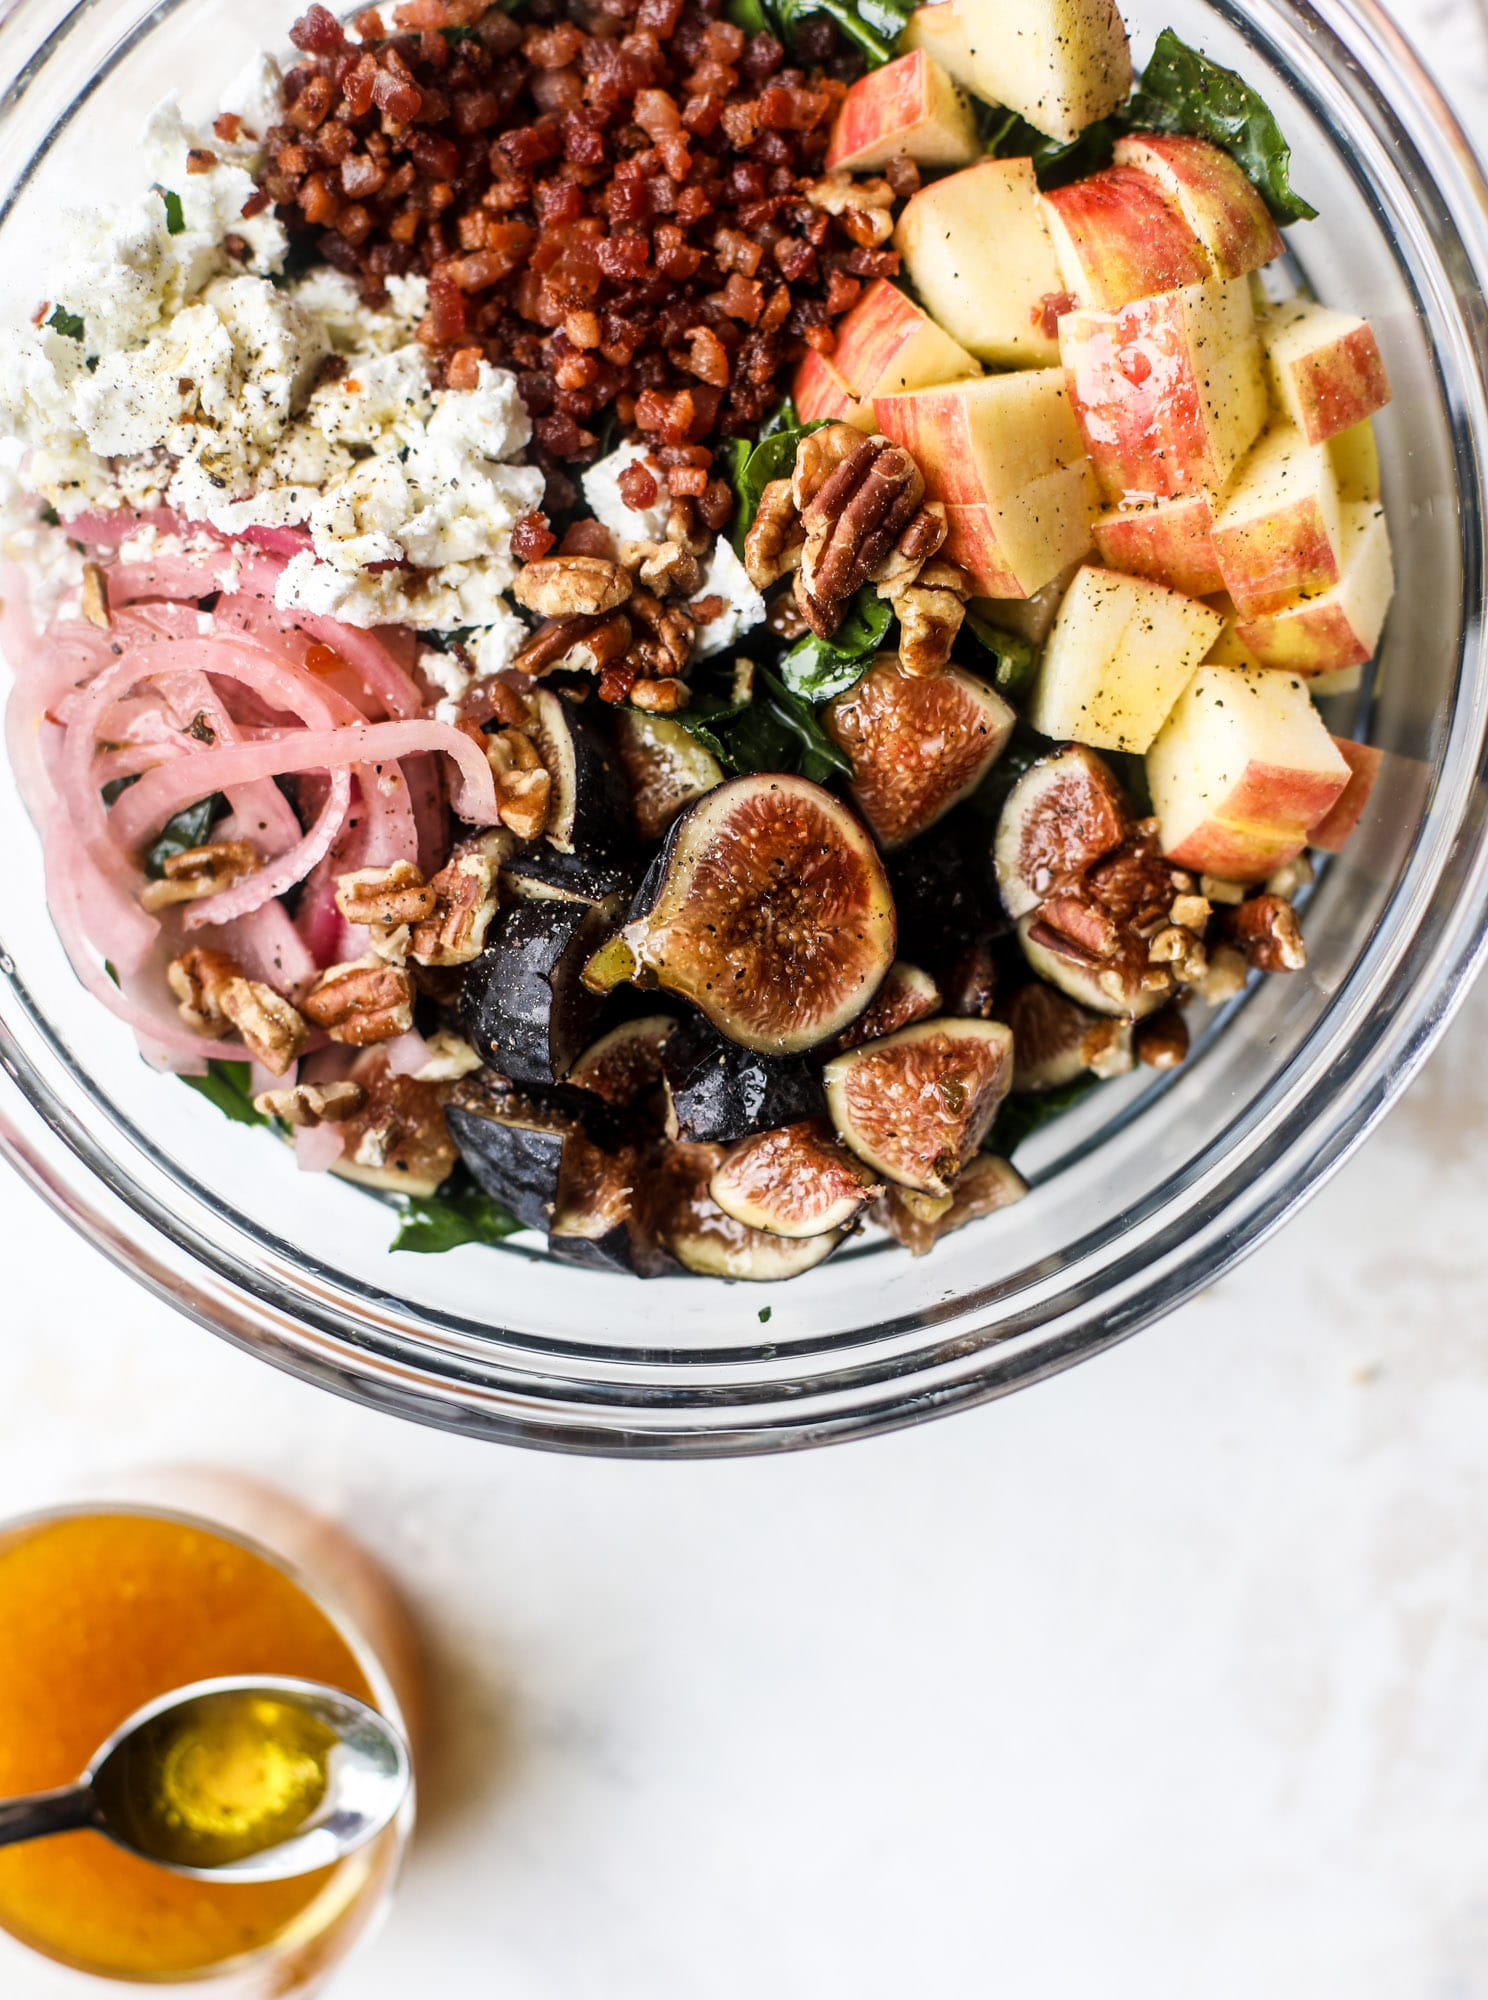 This fall kale salad is perfect for the season and full of so much delicious flavor! Shredded kale, honeycrisp apple, fresh figs, pancetta, pickled onions, pecans and goat cheese come together with a maple cider vinaigrette for salad heaven. I howsweeteats.com #fall #kale #salad #apples #figs #pecans